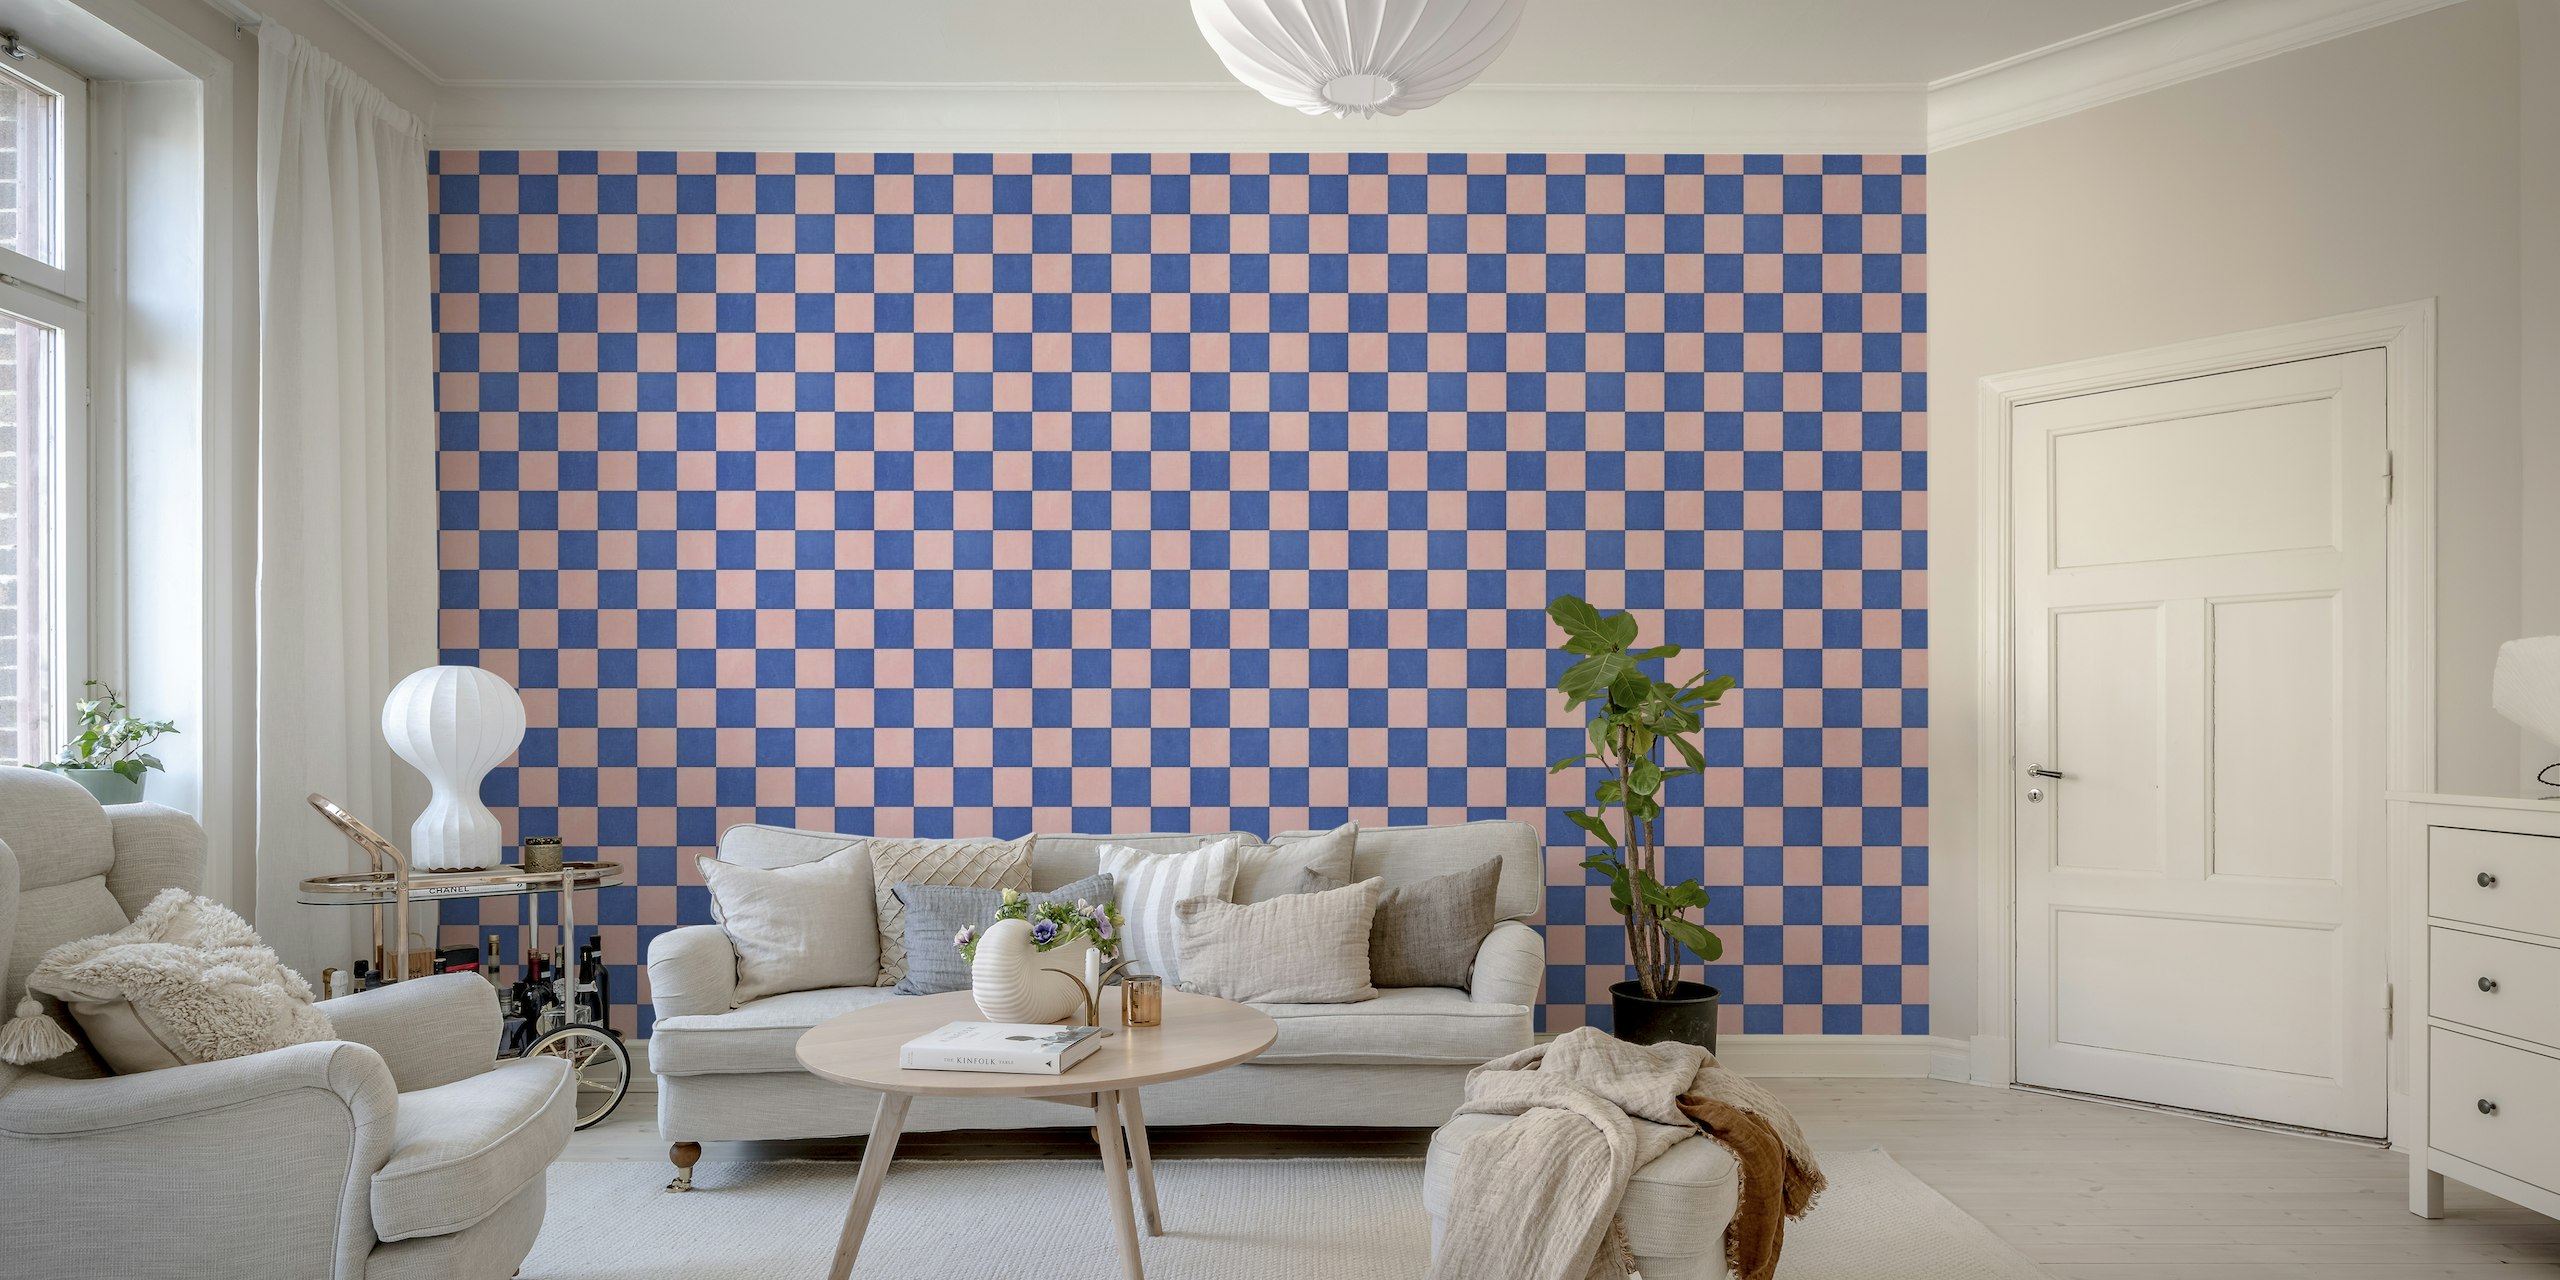 Pink and blue checkerboard pattern wall mural